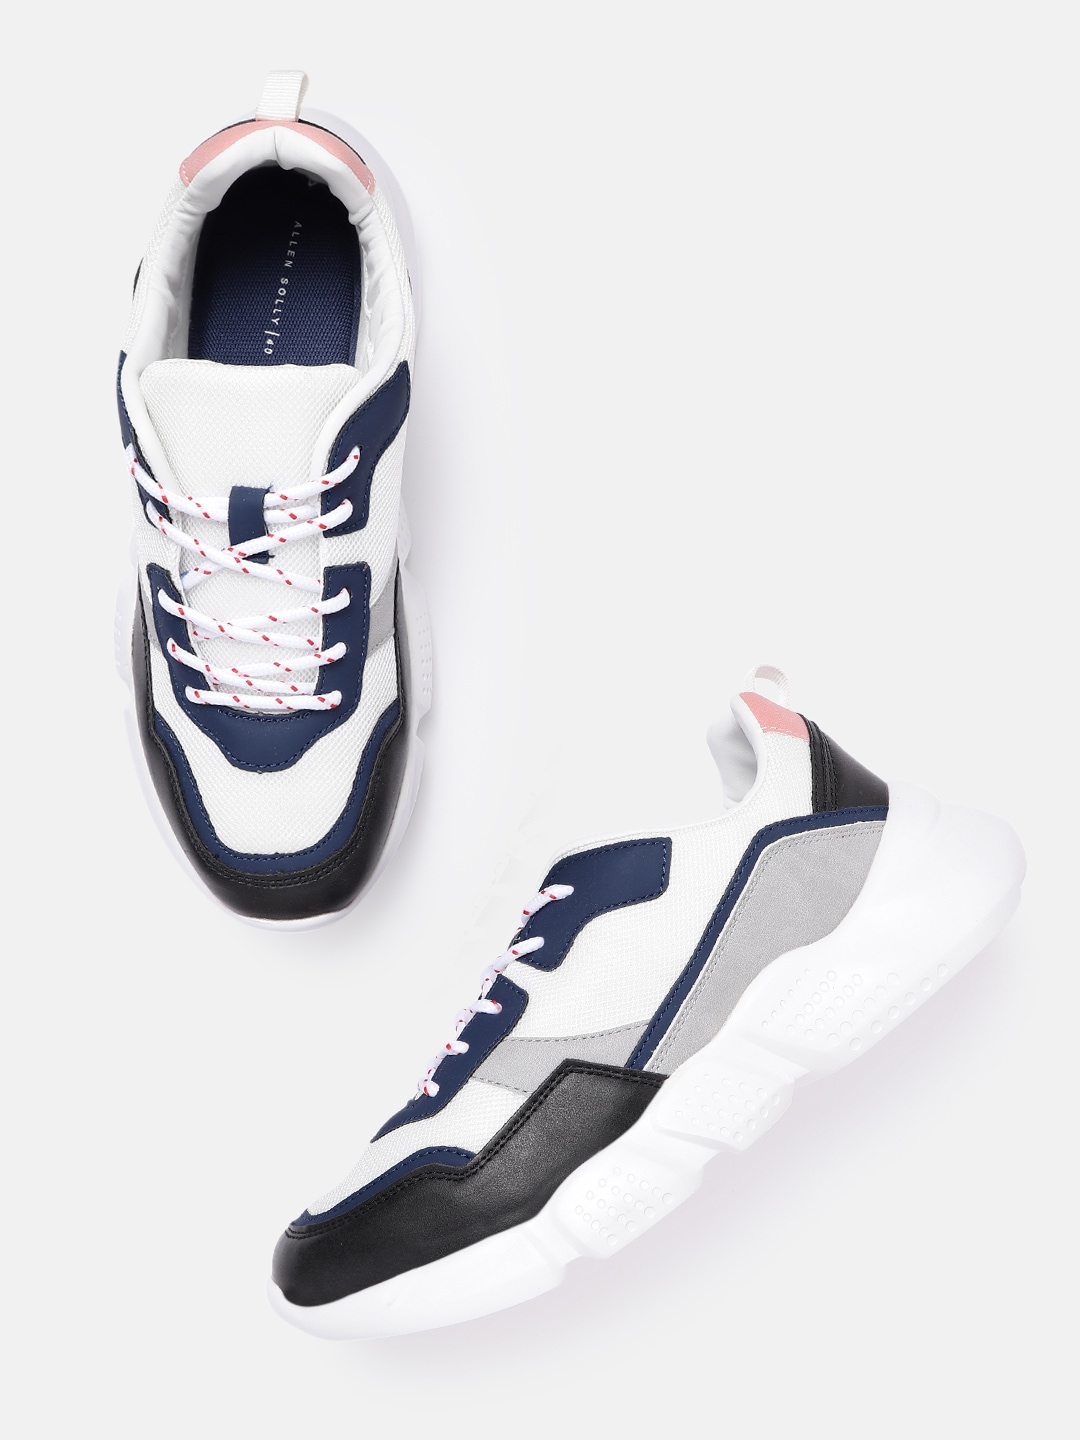 Allen Solly Woman Women White & Navy Blue Colourblocked Sneakers Price in India